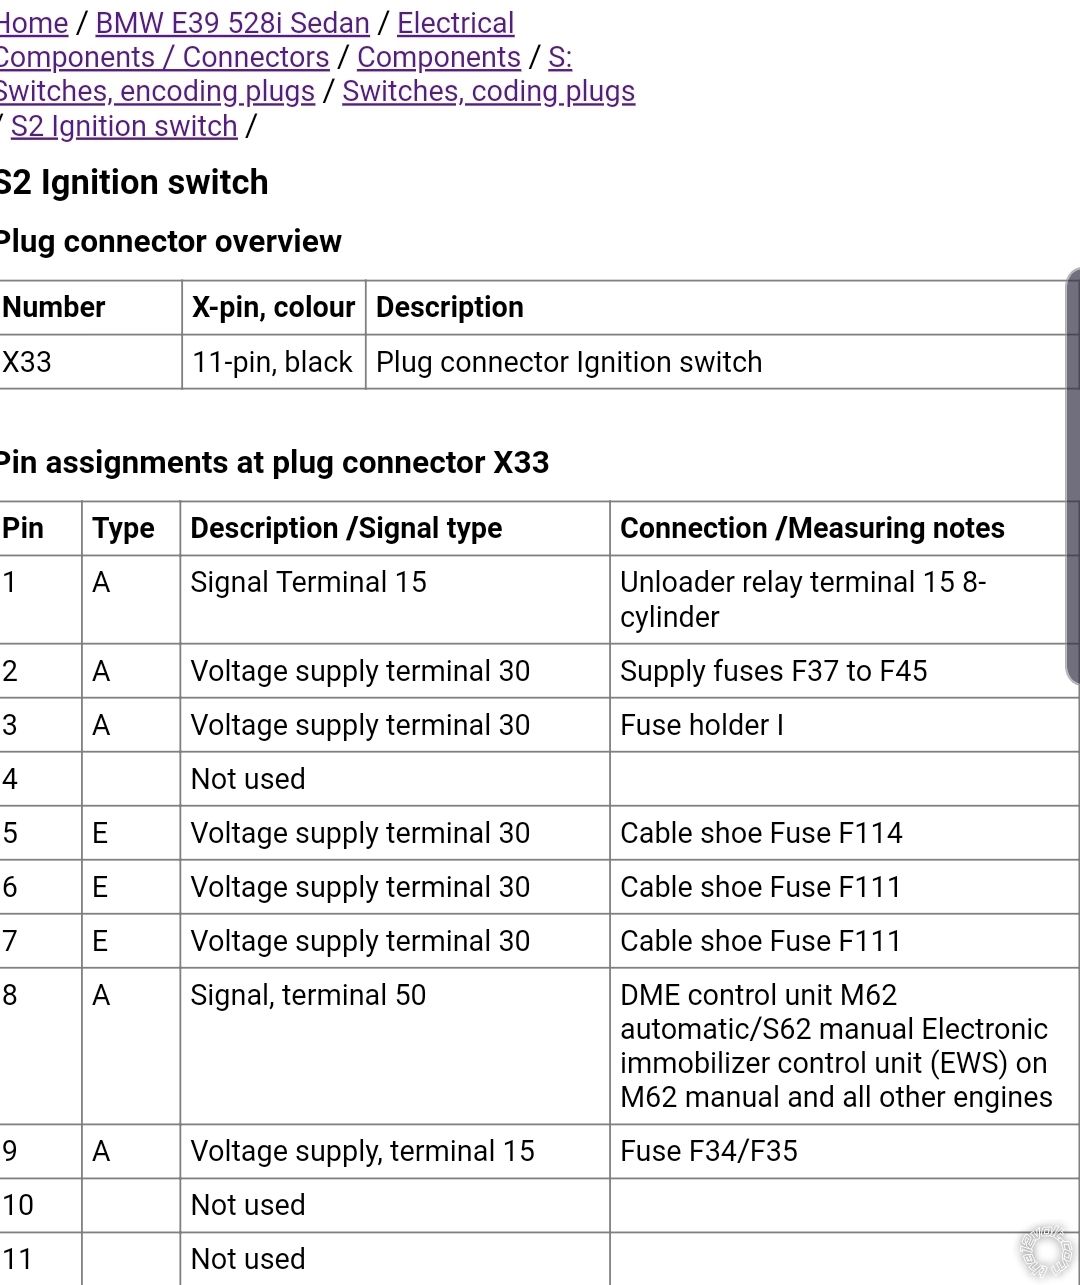 BMW E39 Remote Starter Wiring Confusion - Page 2 -- posted image.